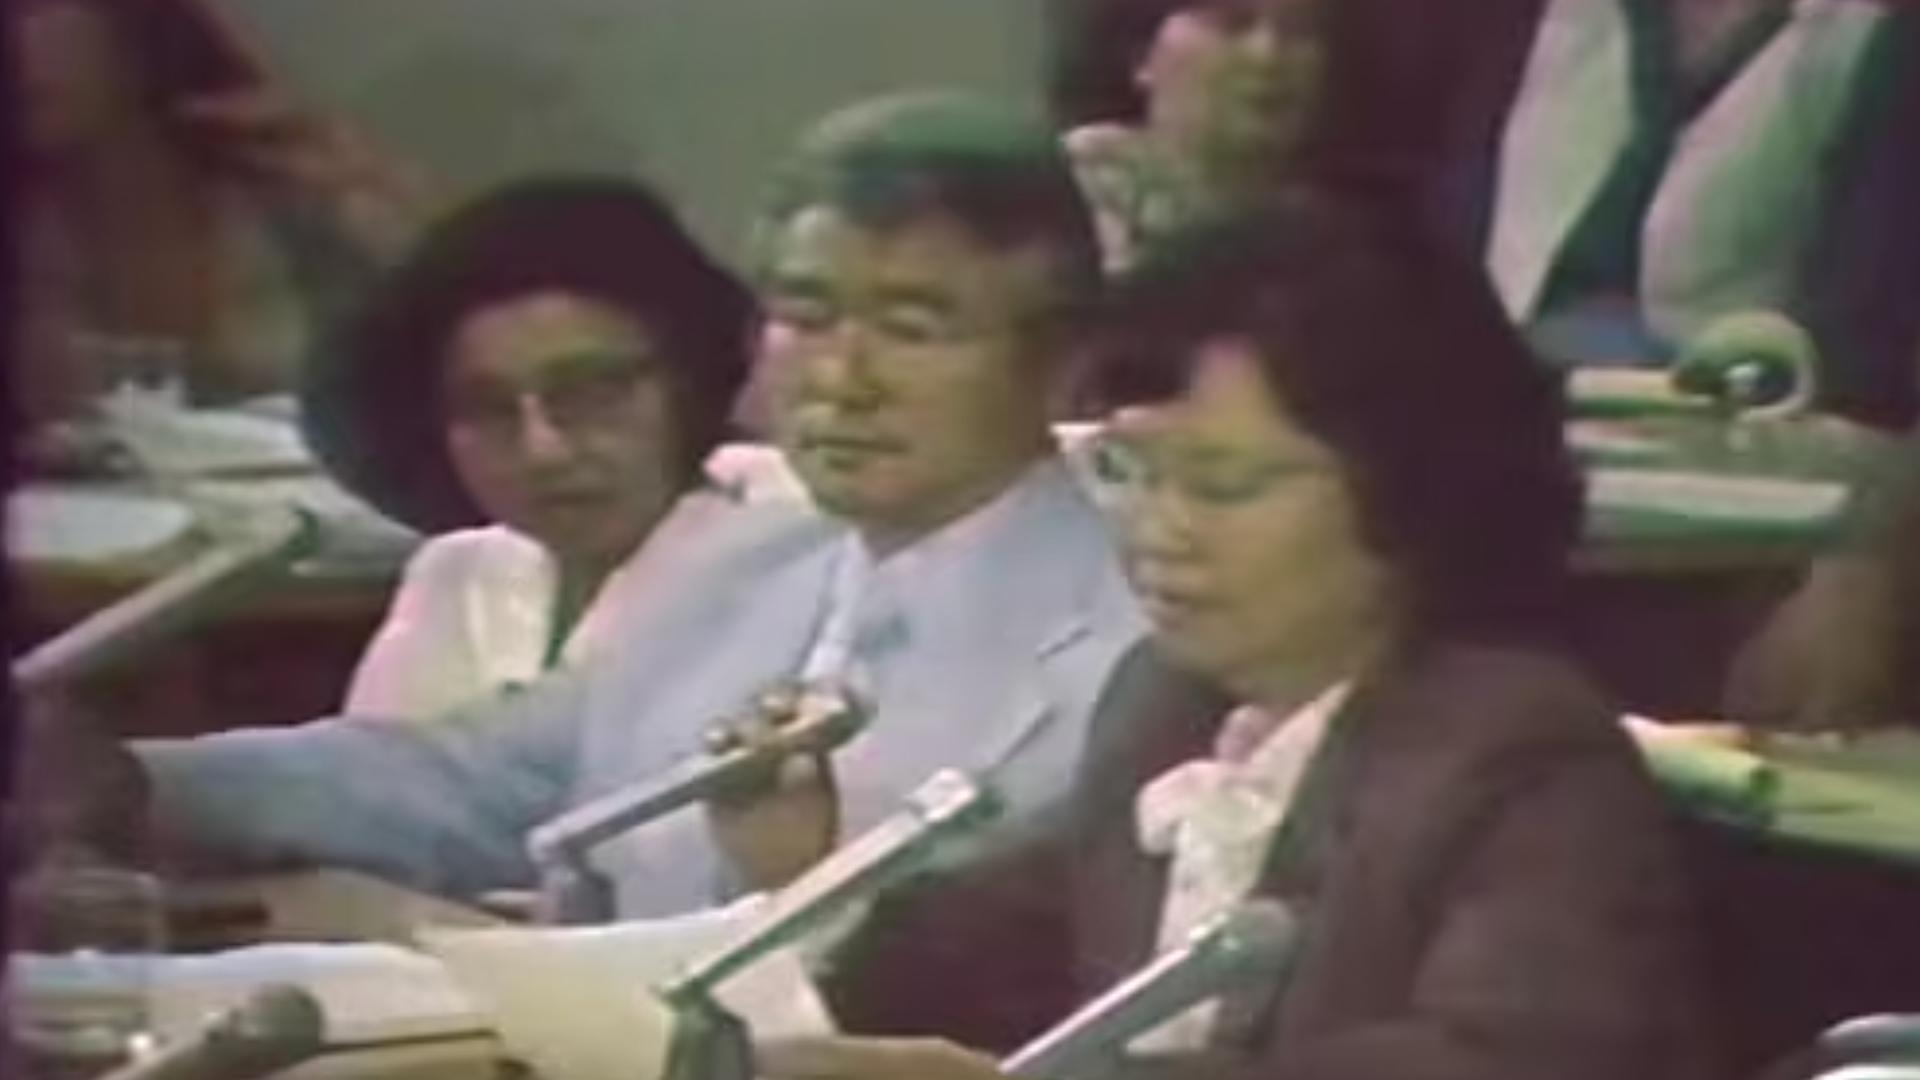 SPEAK OUT FOR JUSTICE: AUGUST 5, 1981 - PART 5